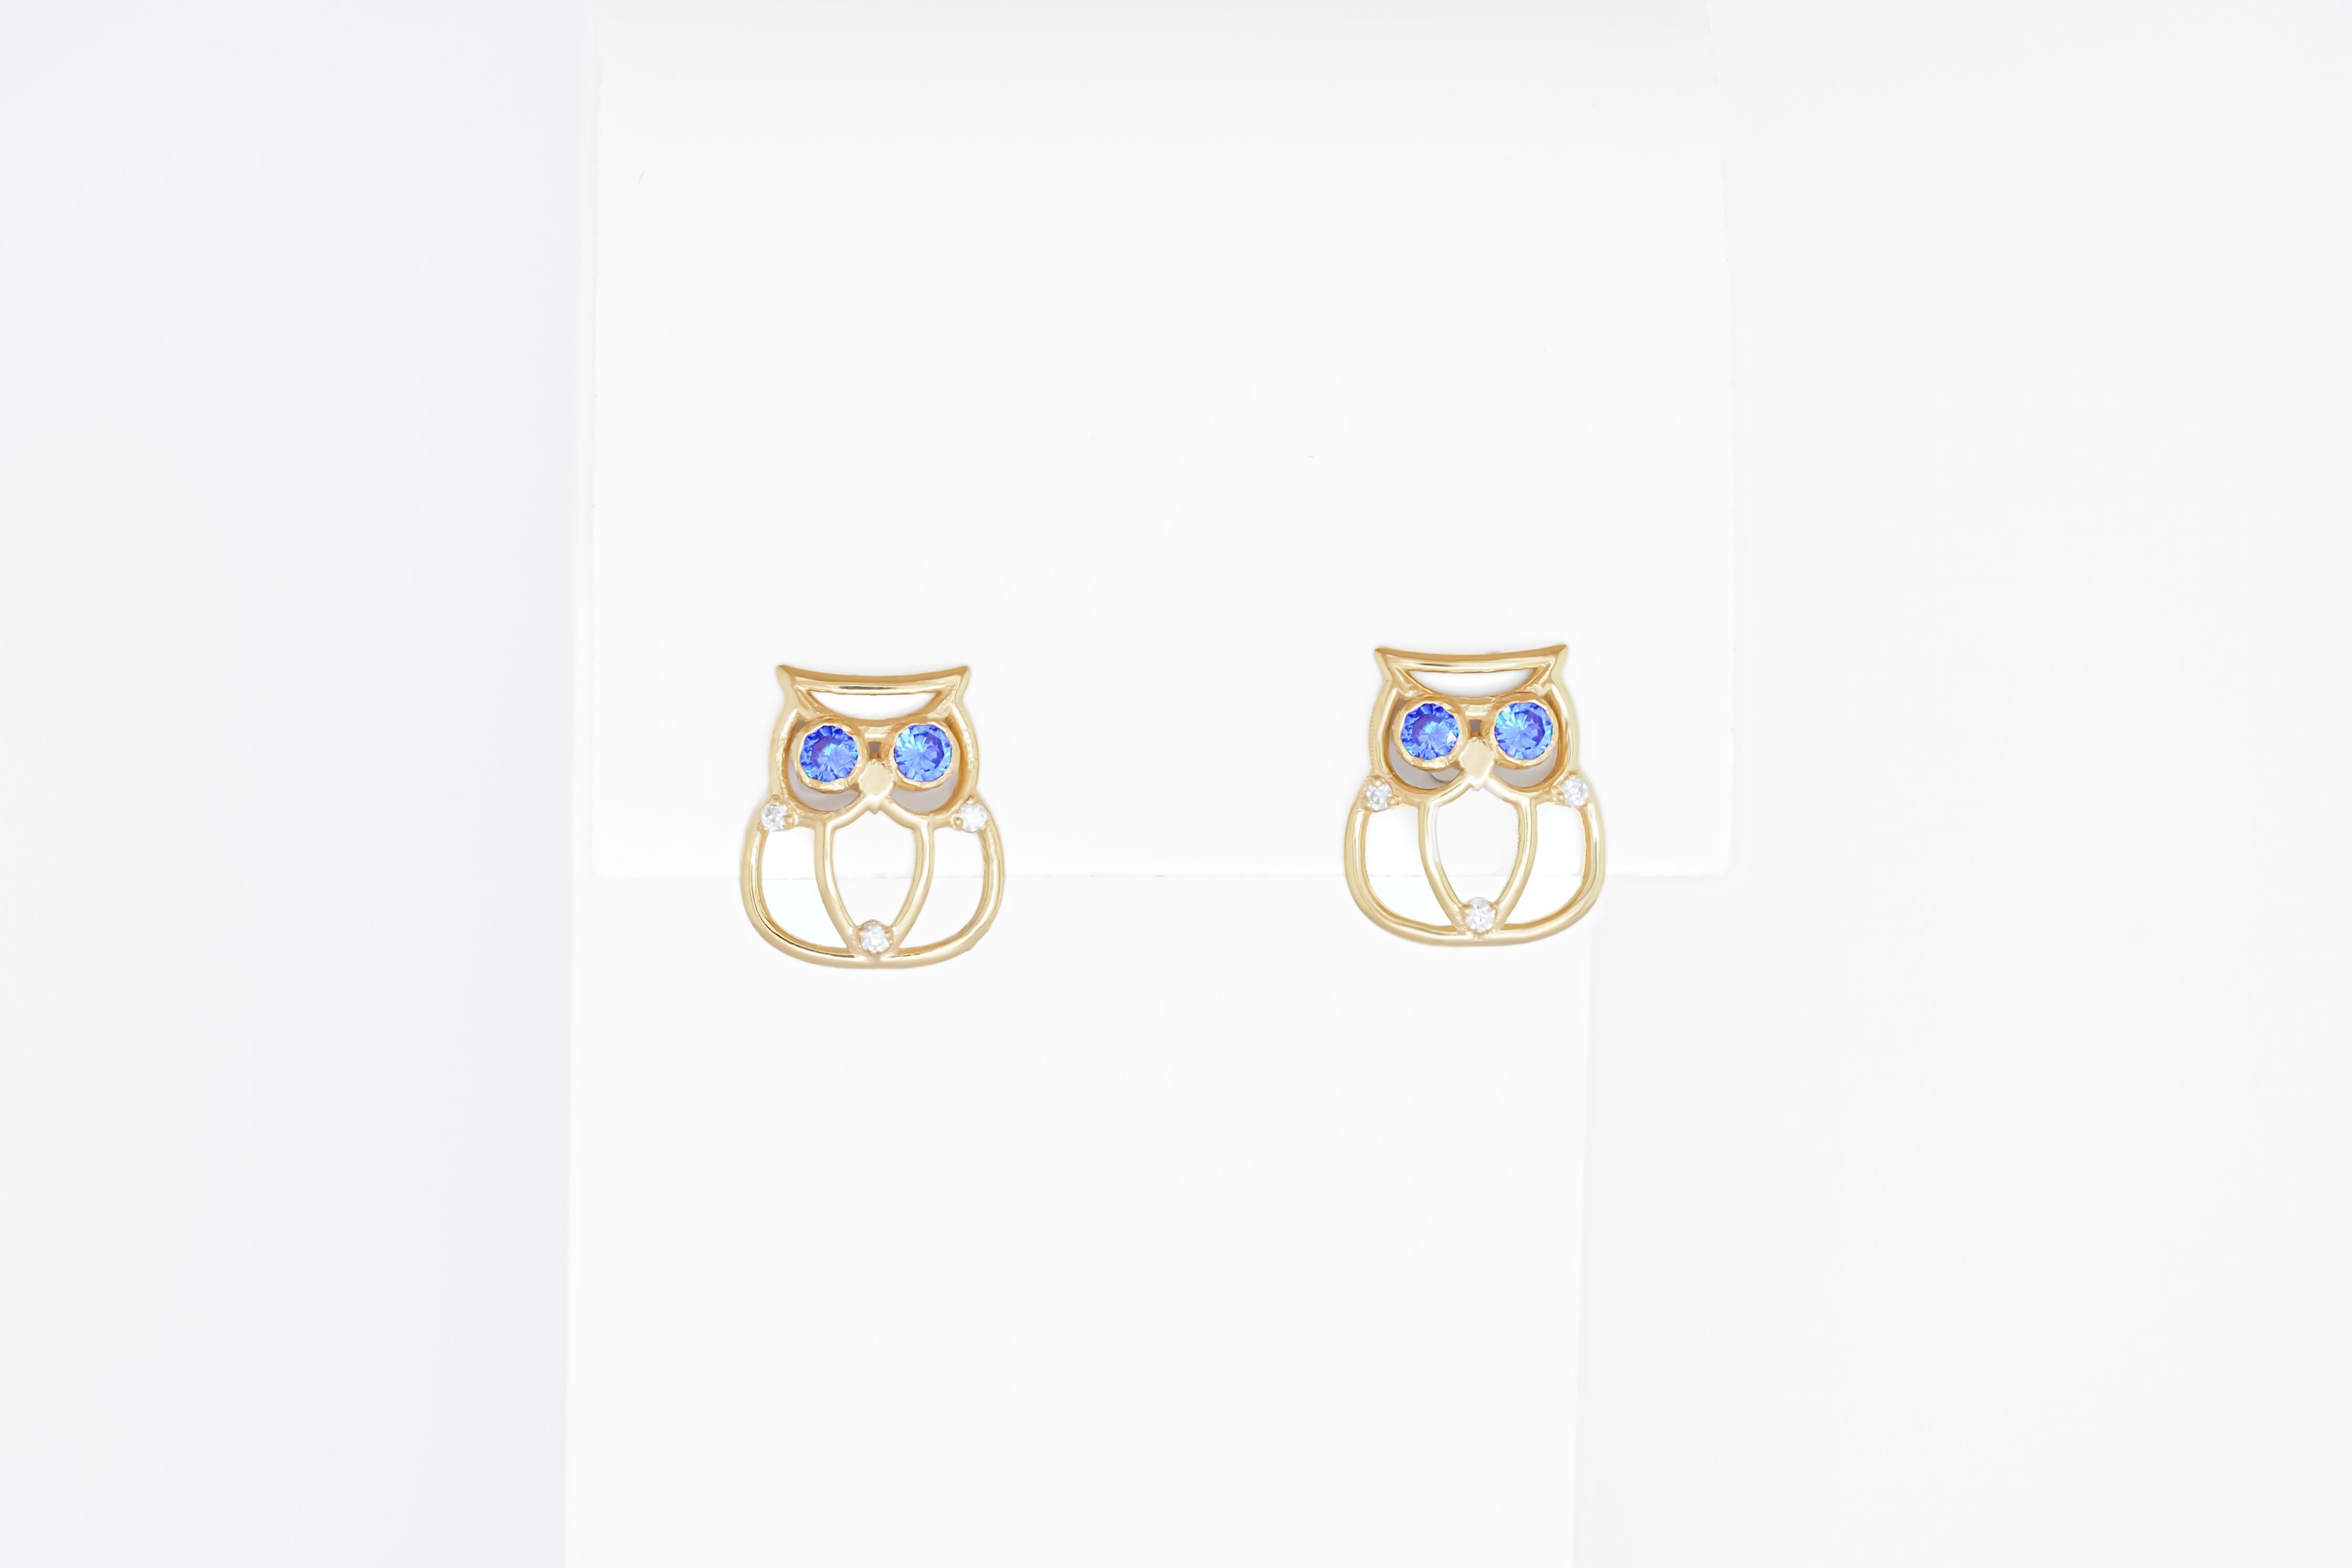 Owl earrings and ring set in 14k gold. Bird earrings and ring with sapphires. Delicate gold earrings and ring with blue gemstones.
 
Metal - 14k gold
Total Weight -3.5 g depends from ring size
Earrings size: 12x10mm

Gemstones:
4 sapphires, round